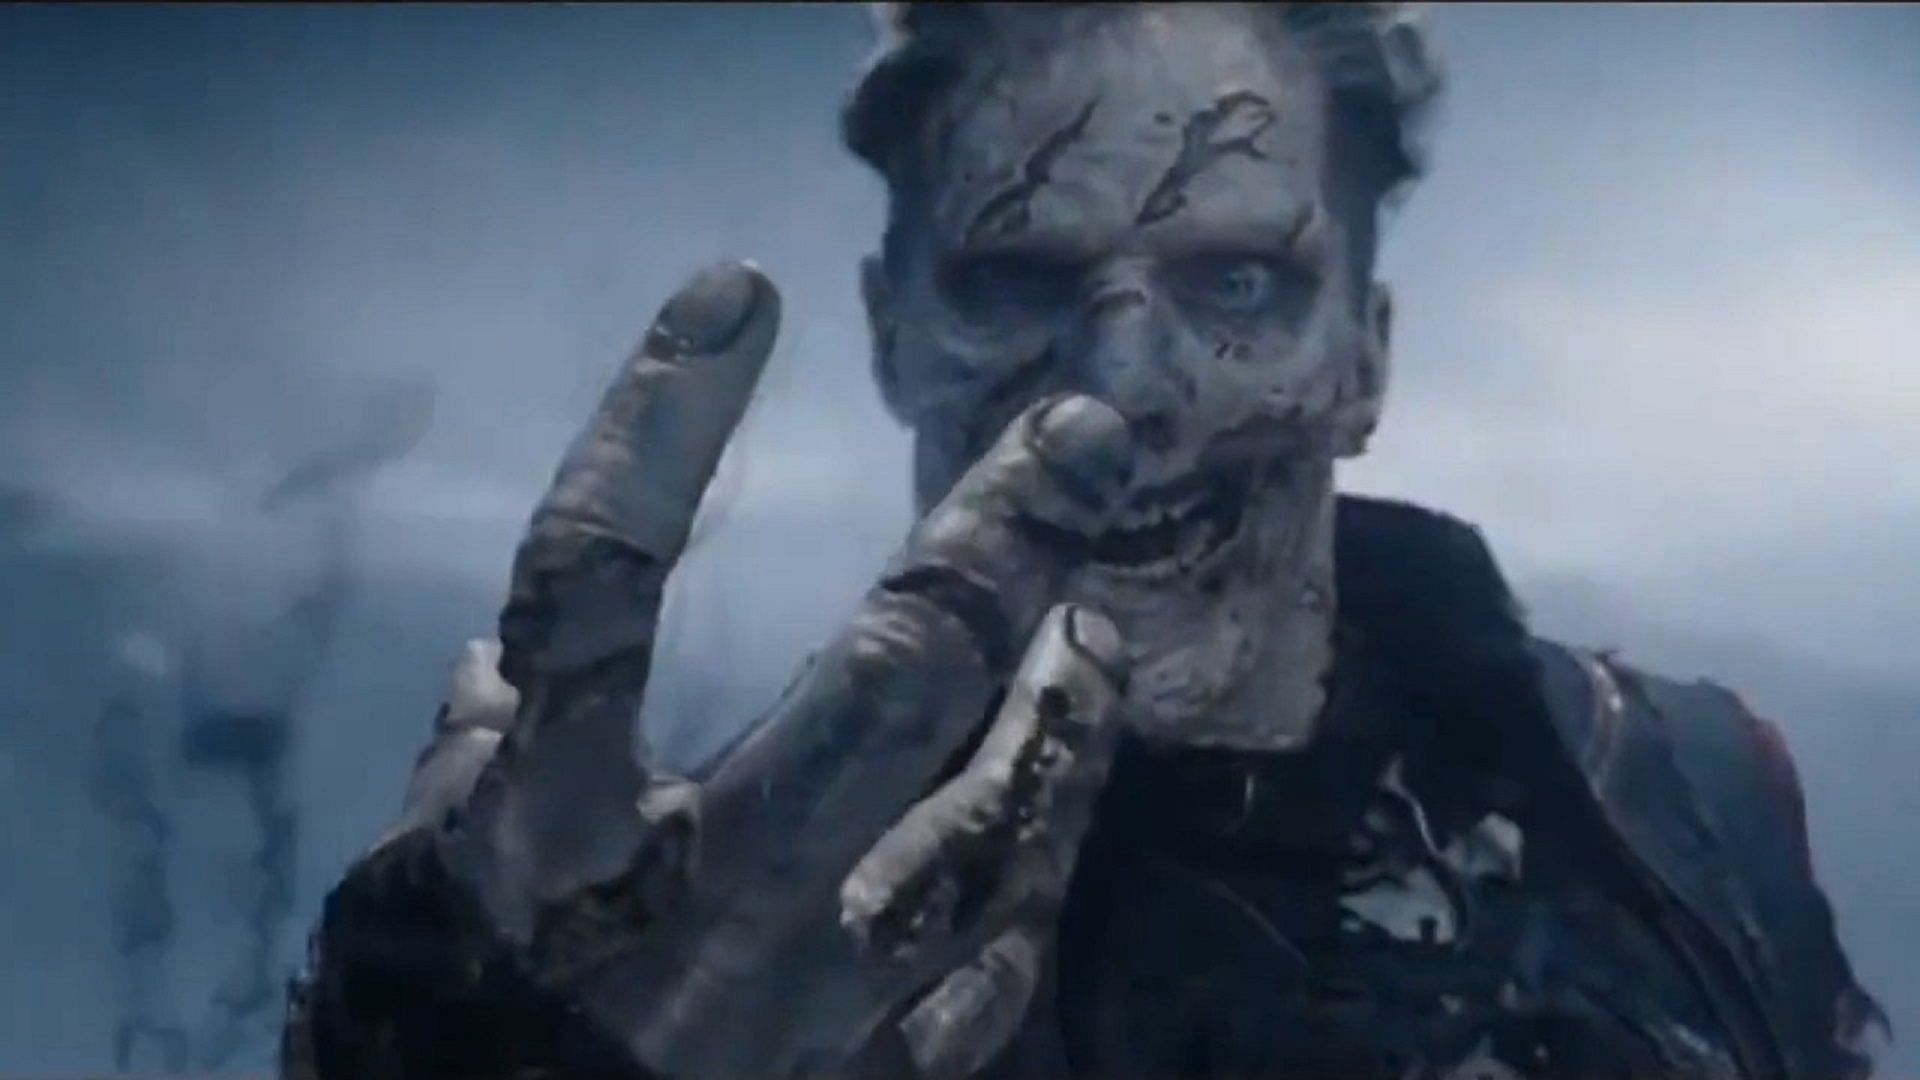 Zombie Strange was teased in the IMAX trailer (Image via IMAX/Youtube)